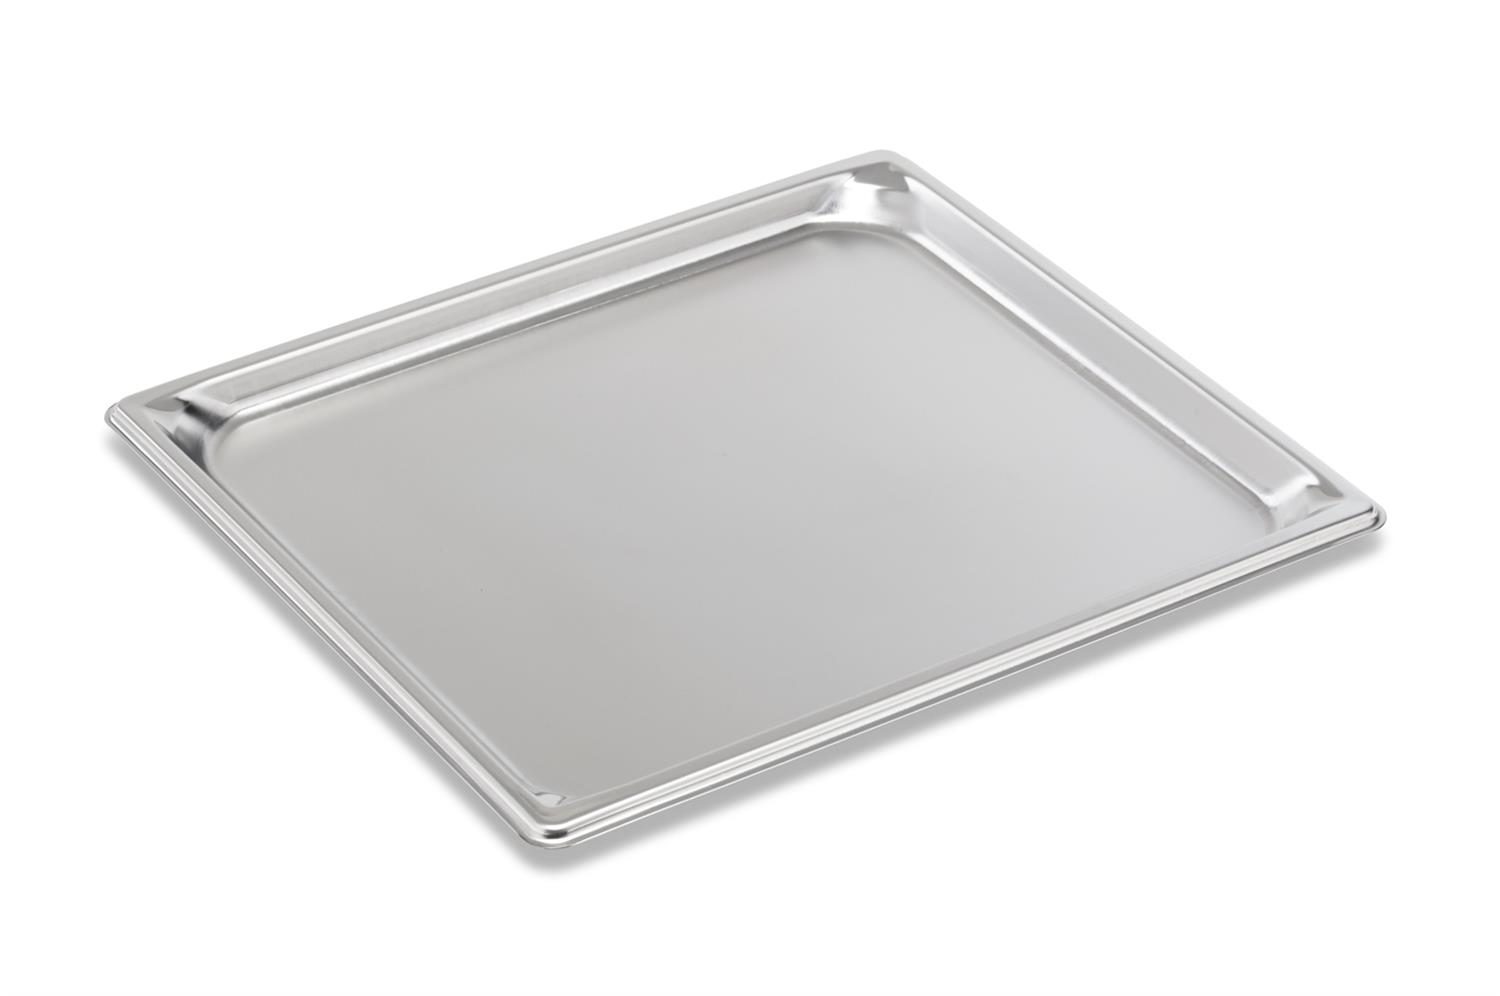 Vollrath 30102 Super Pan V 2/3 Size Stainless Steel Steam Table Pan